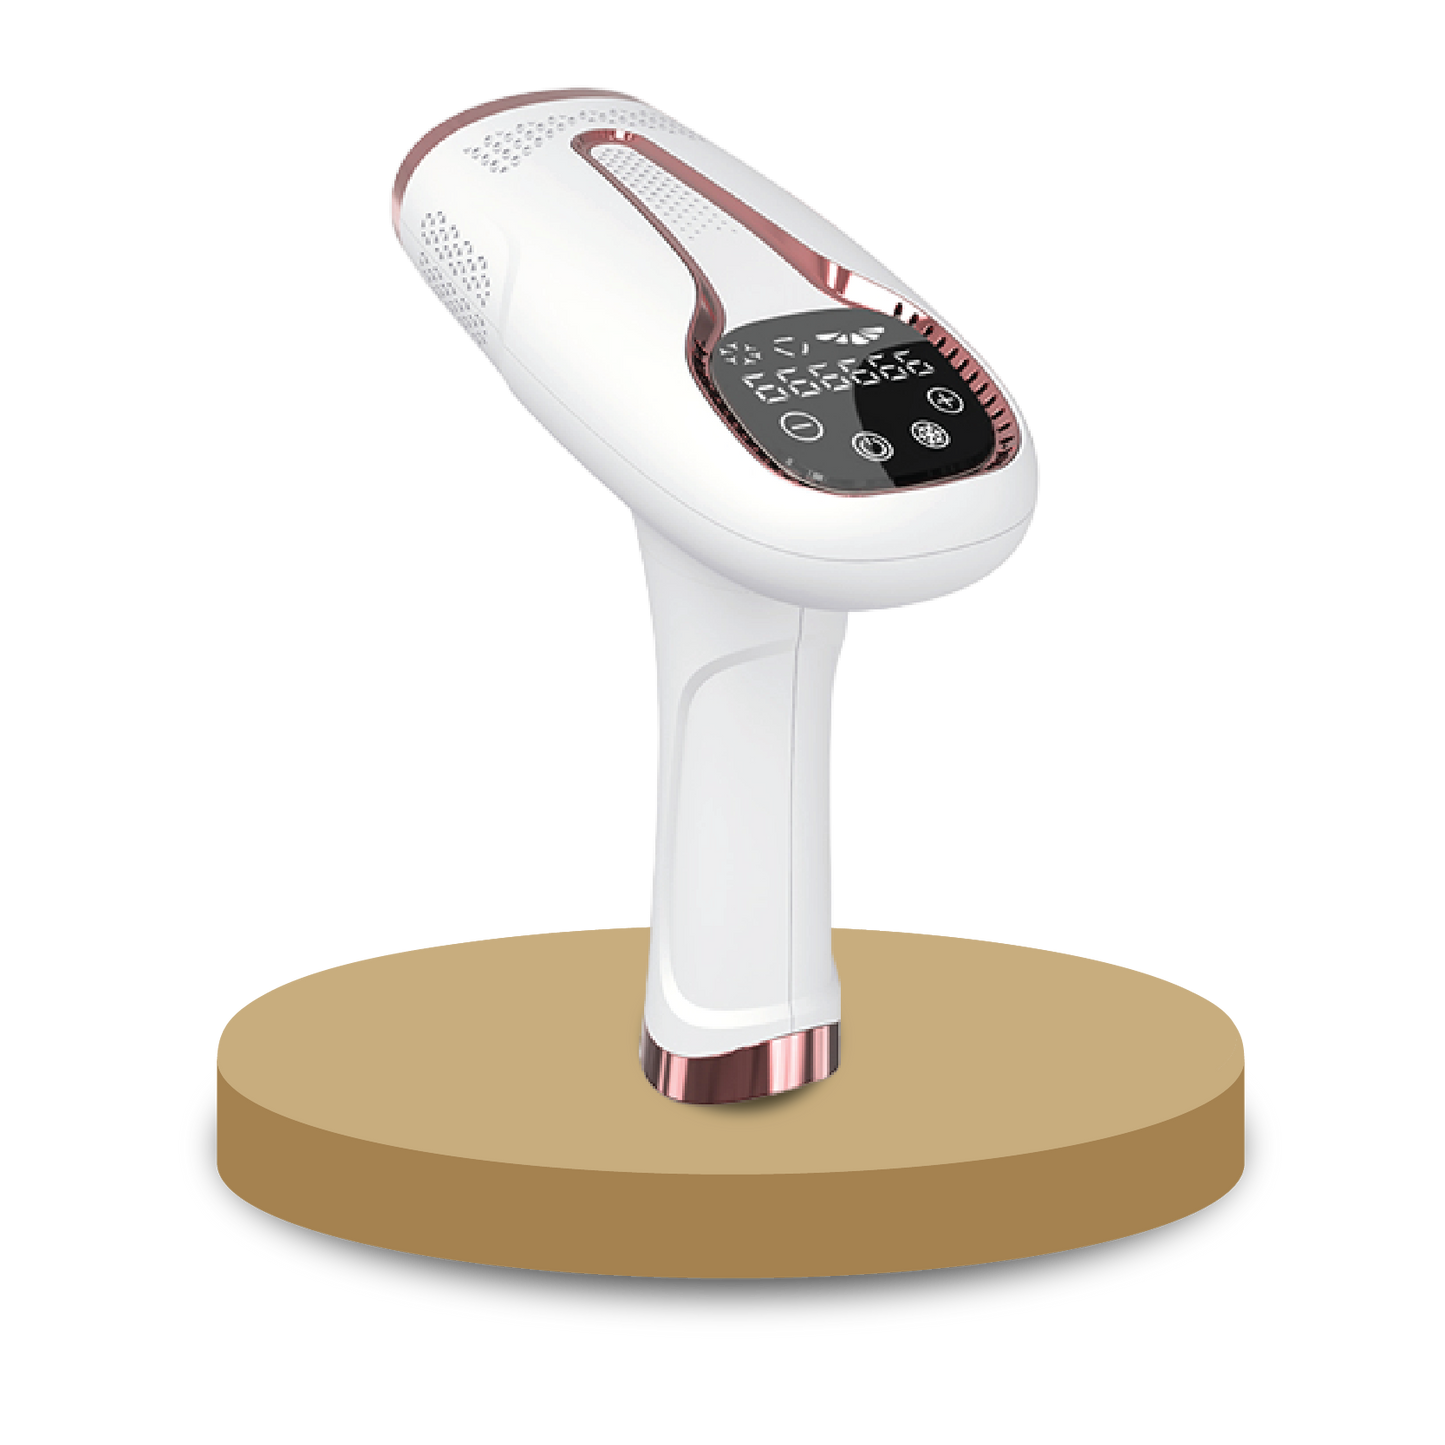 DYI Flashes IPL Hair Removal